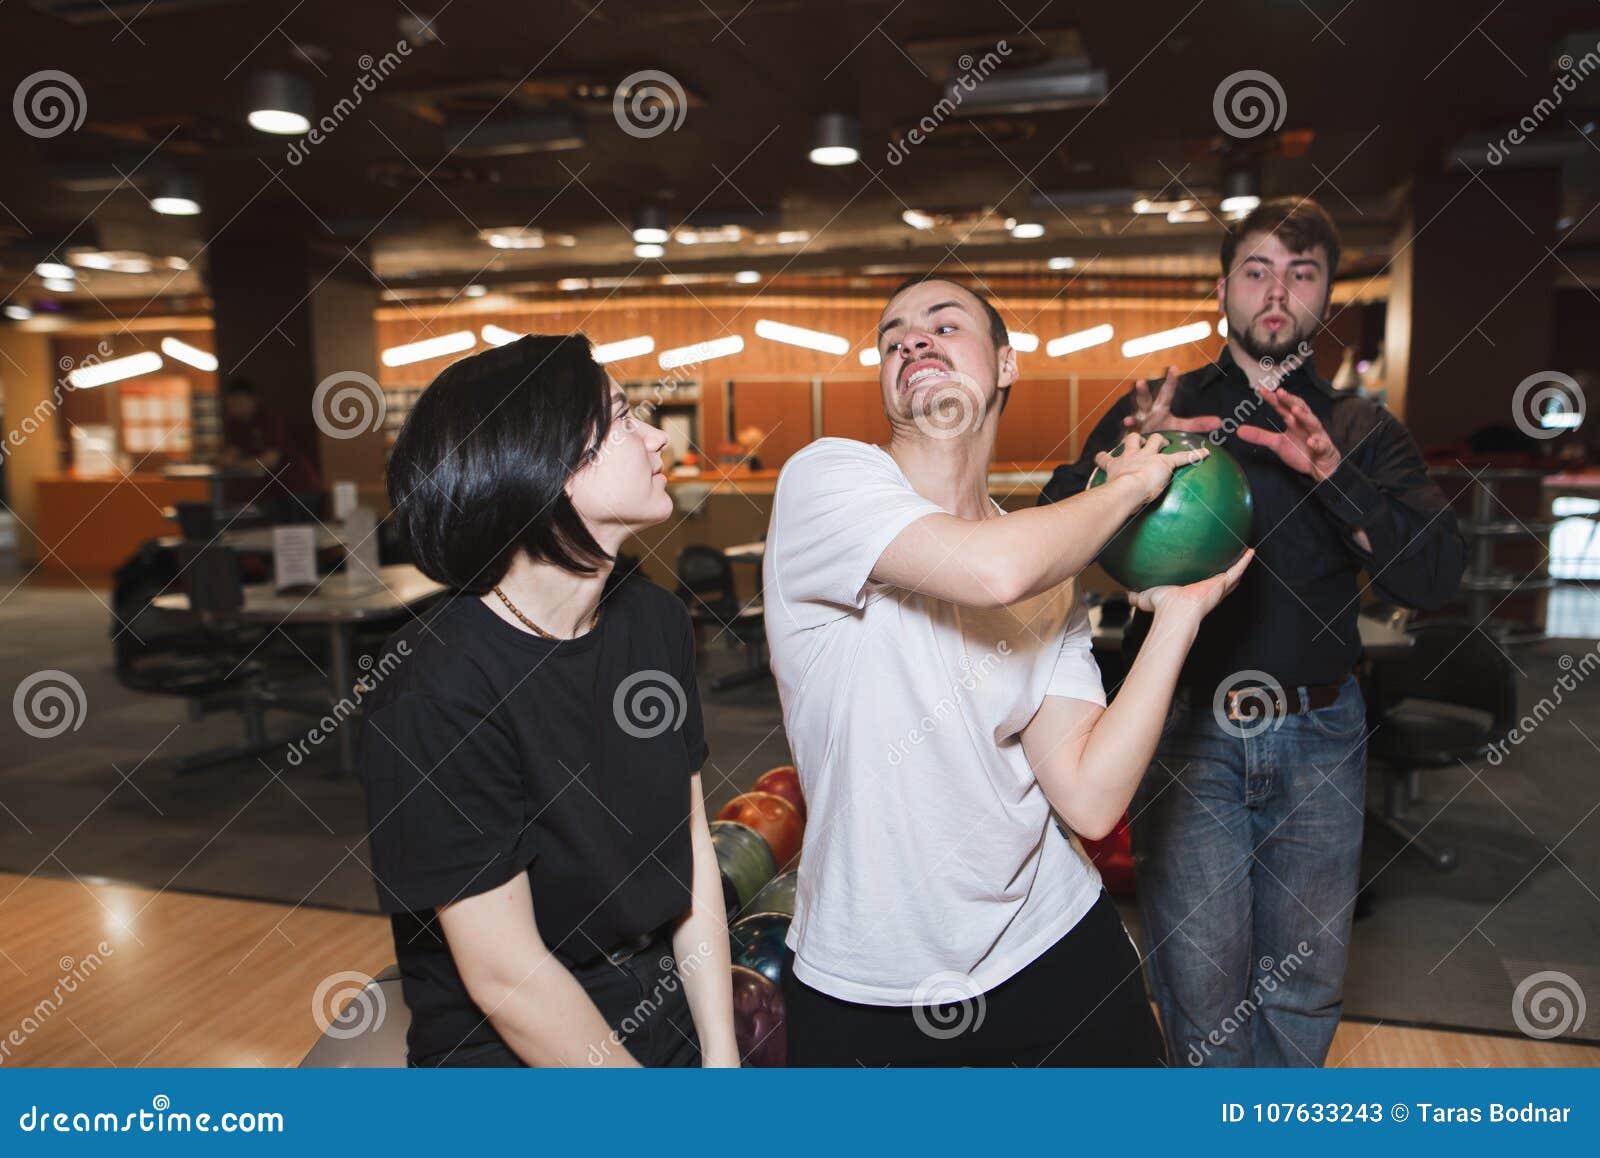 Fight of Young People in Bowling Club. Stock Image - Image of funny, club:  107633243